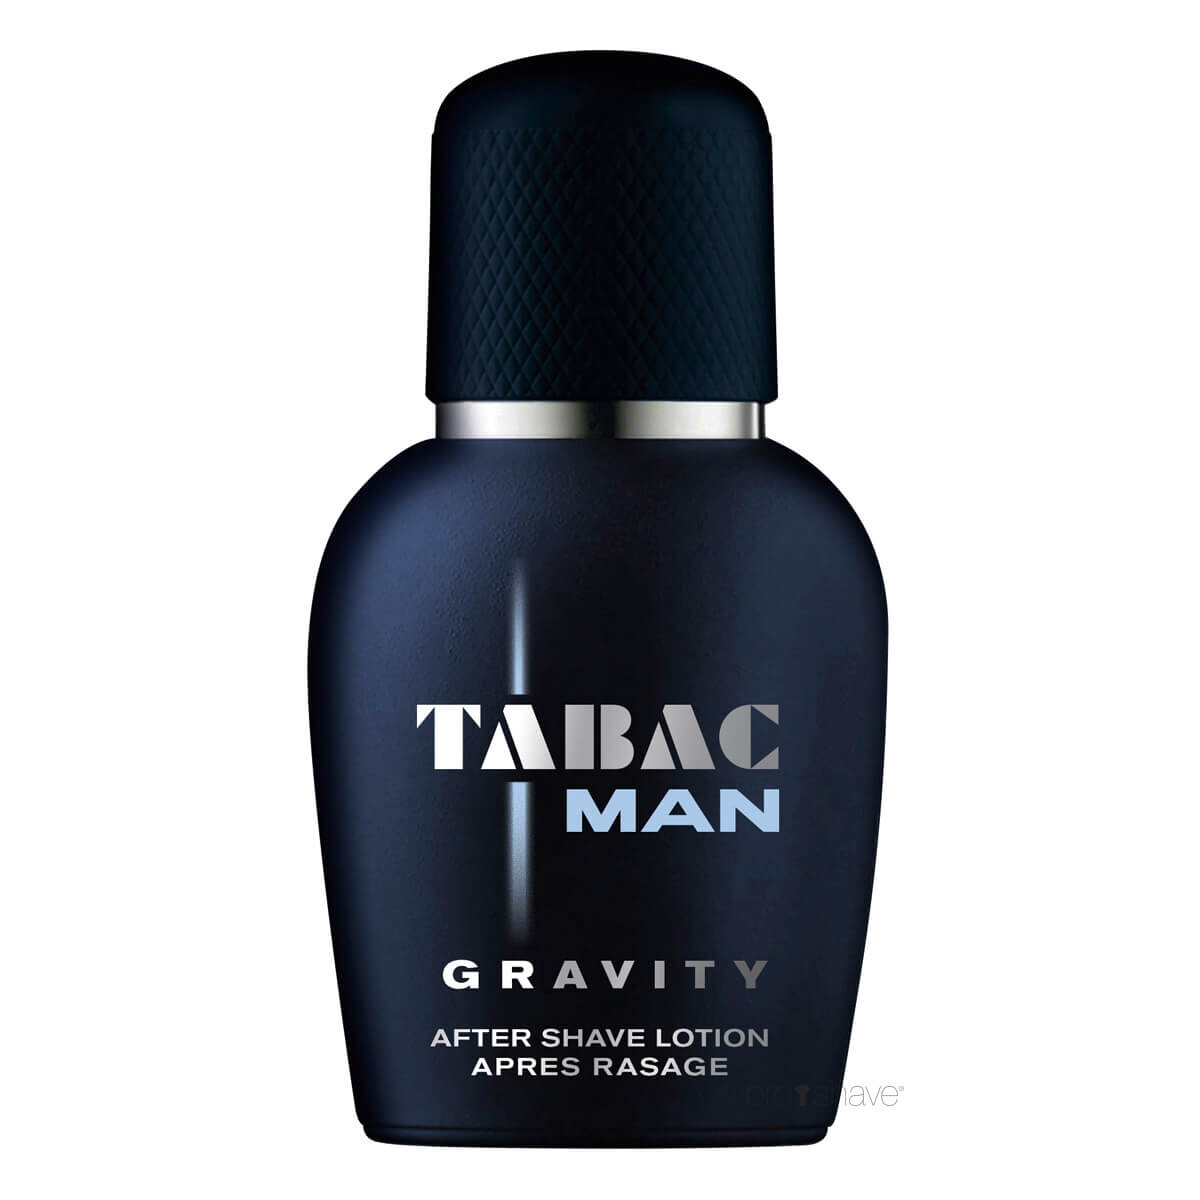 Tabac Man Gravity Aftershave Lotion, 50 ml.